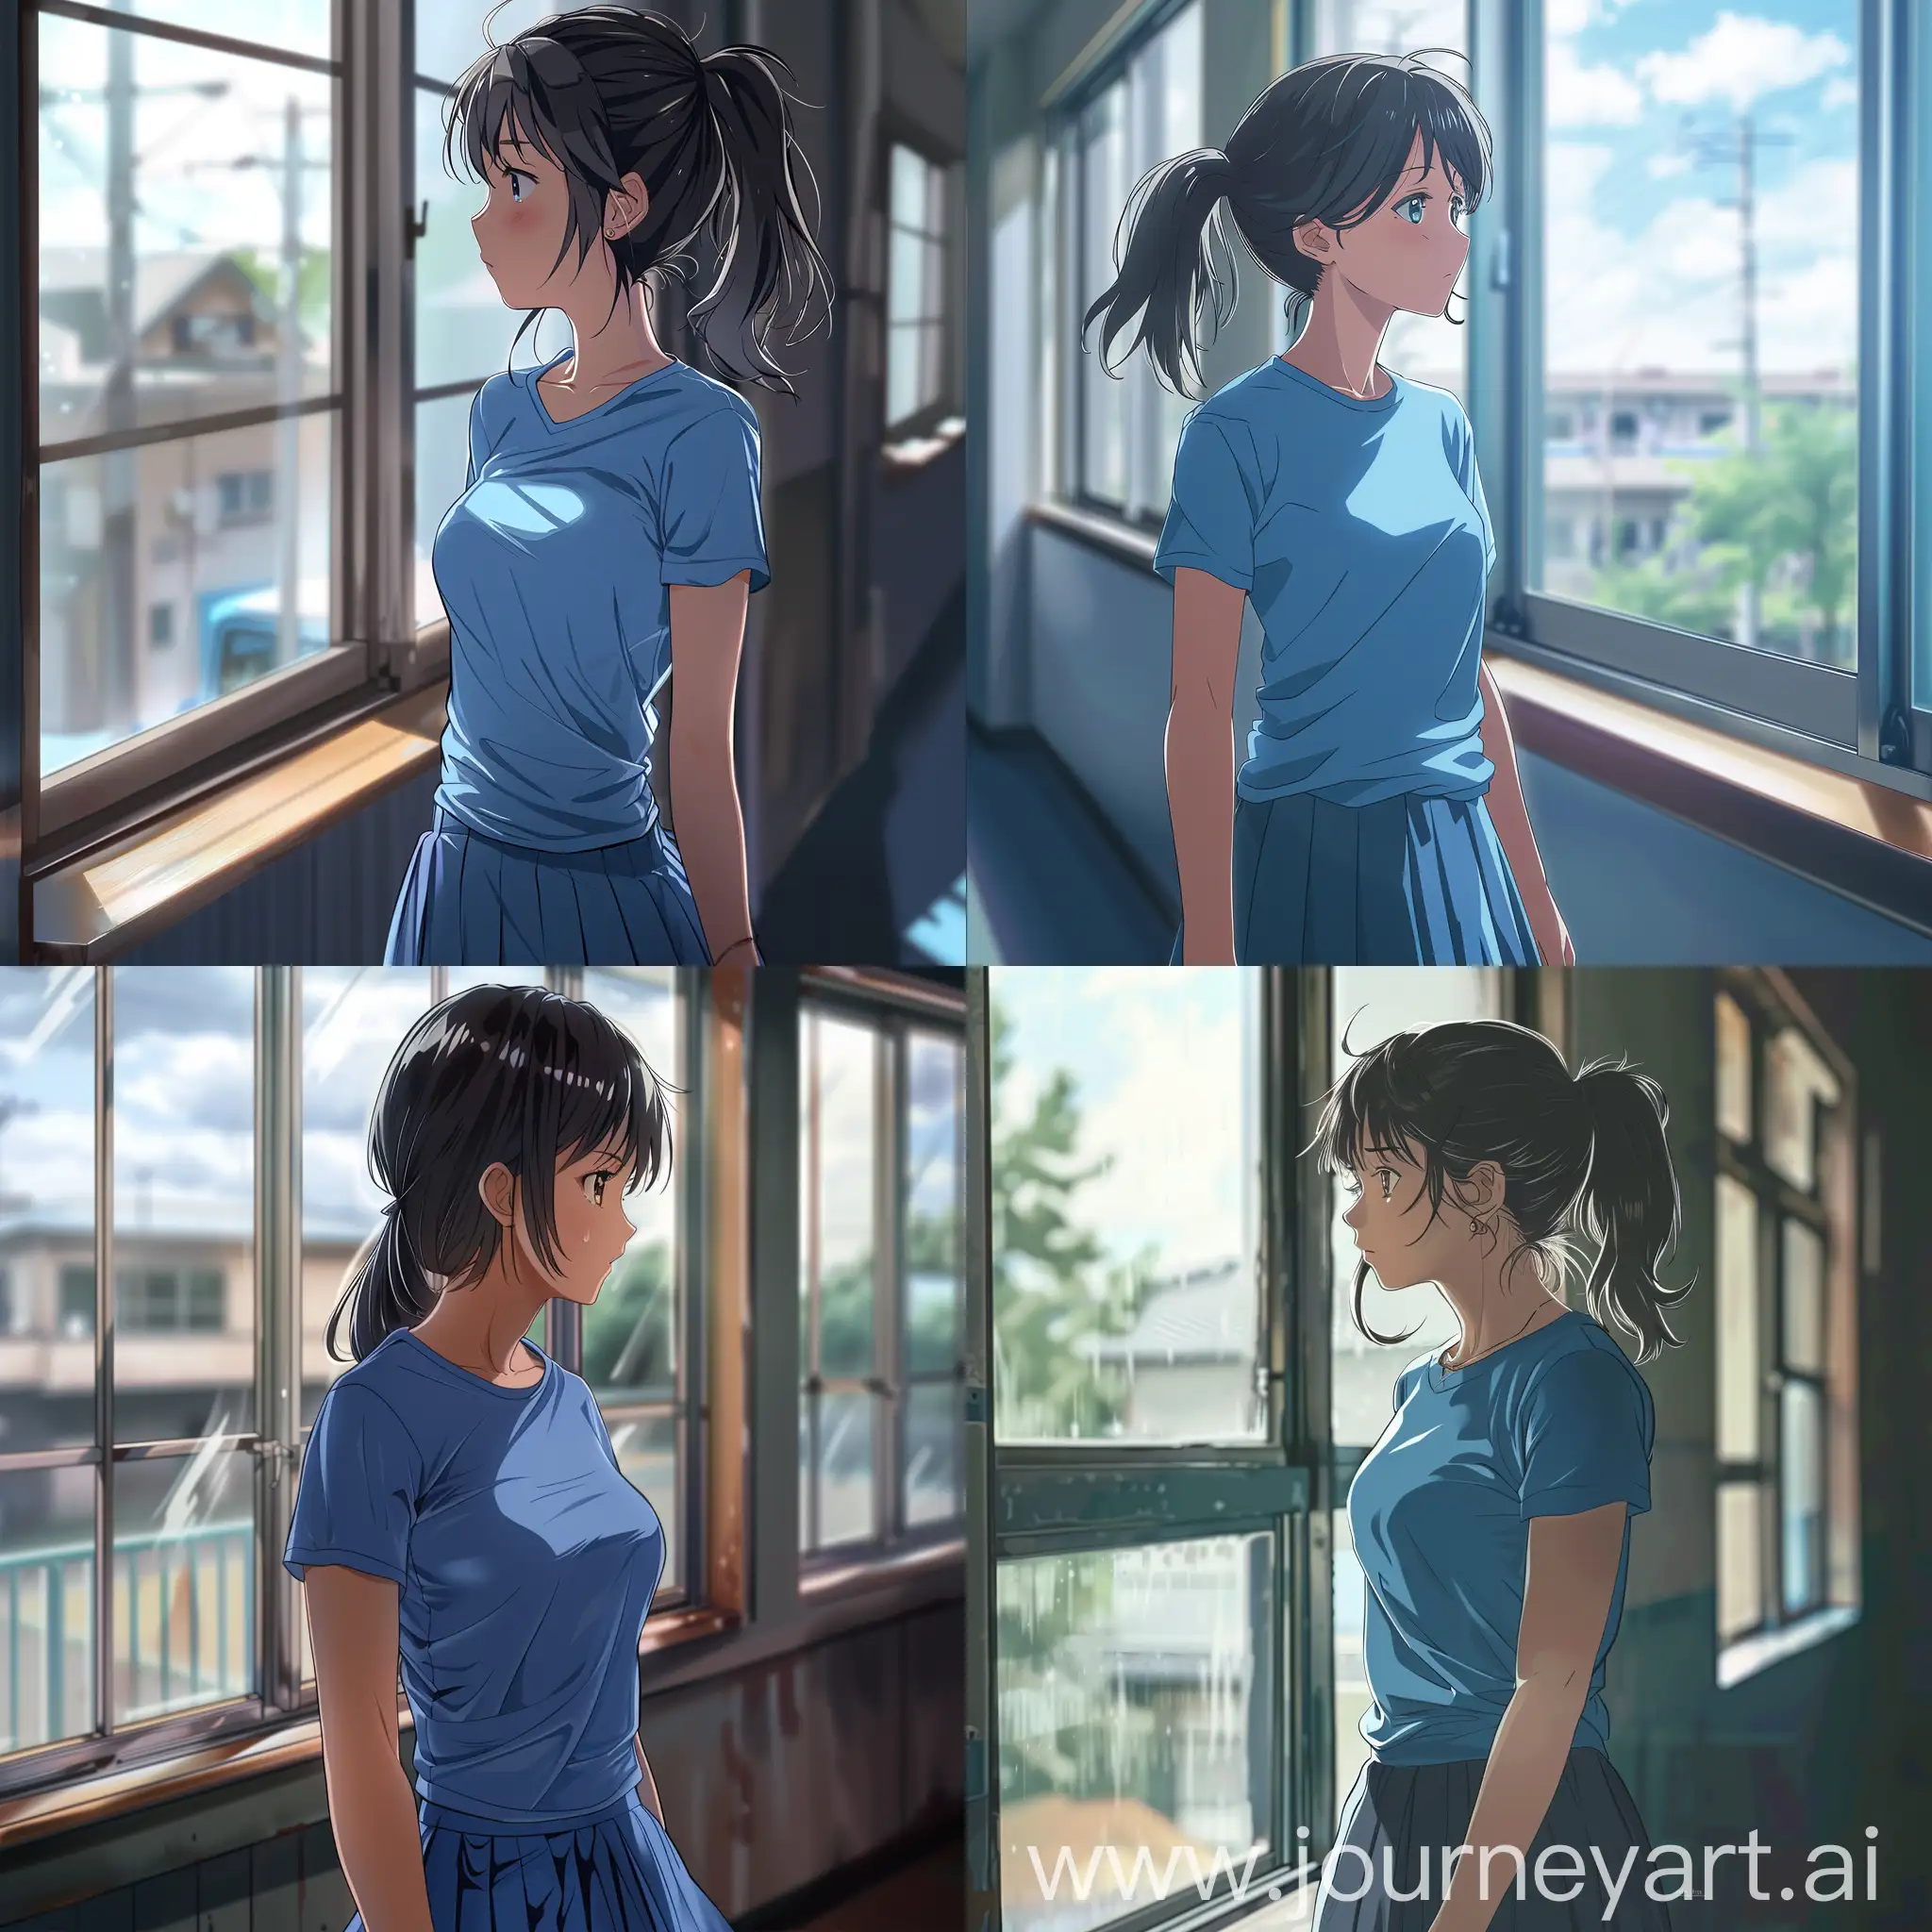 Anime-Girl-in-Blue-TShirt-and-Skirt-Gazing-Out-Window-at-Educational-Institution